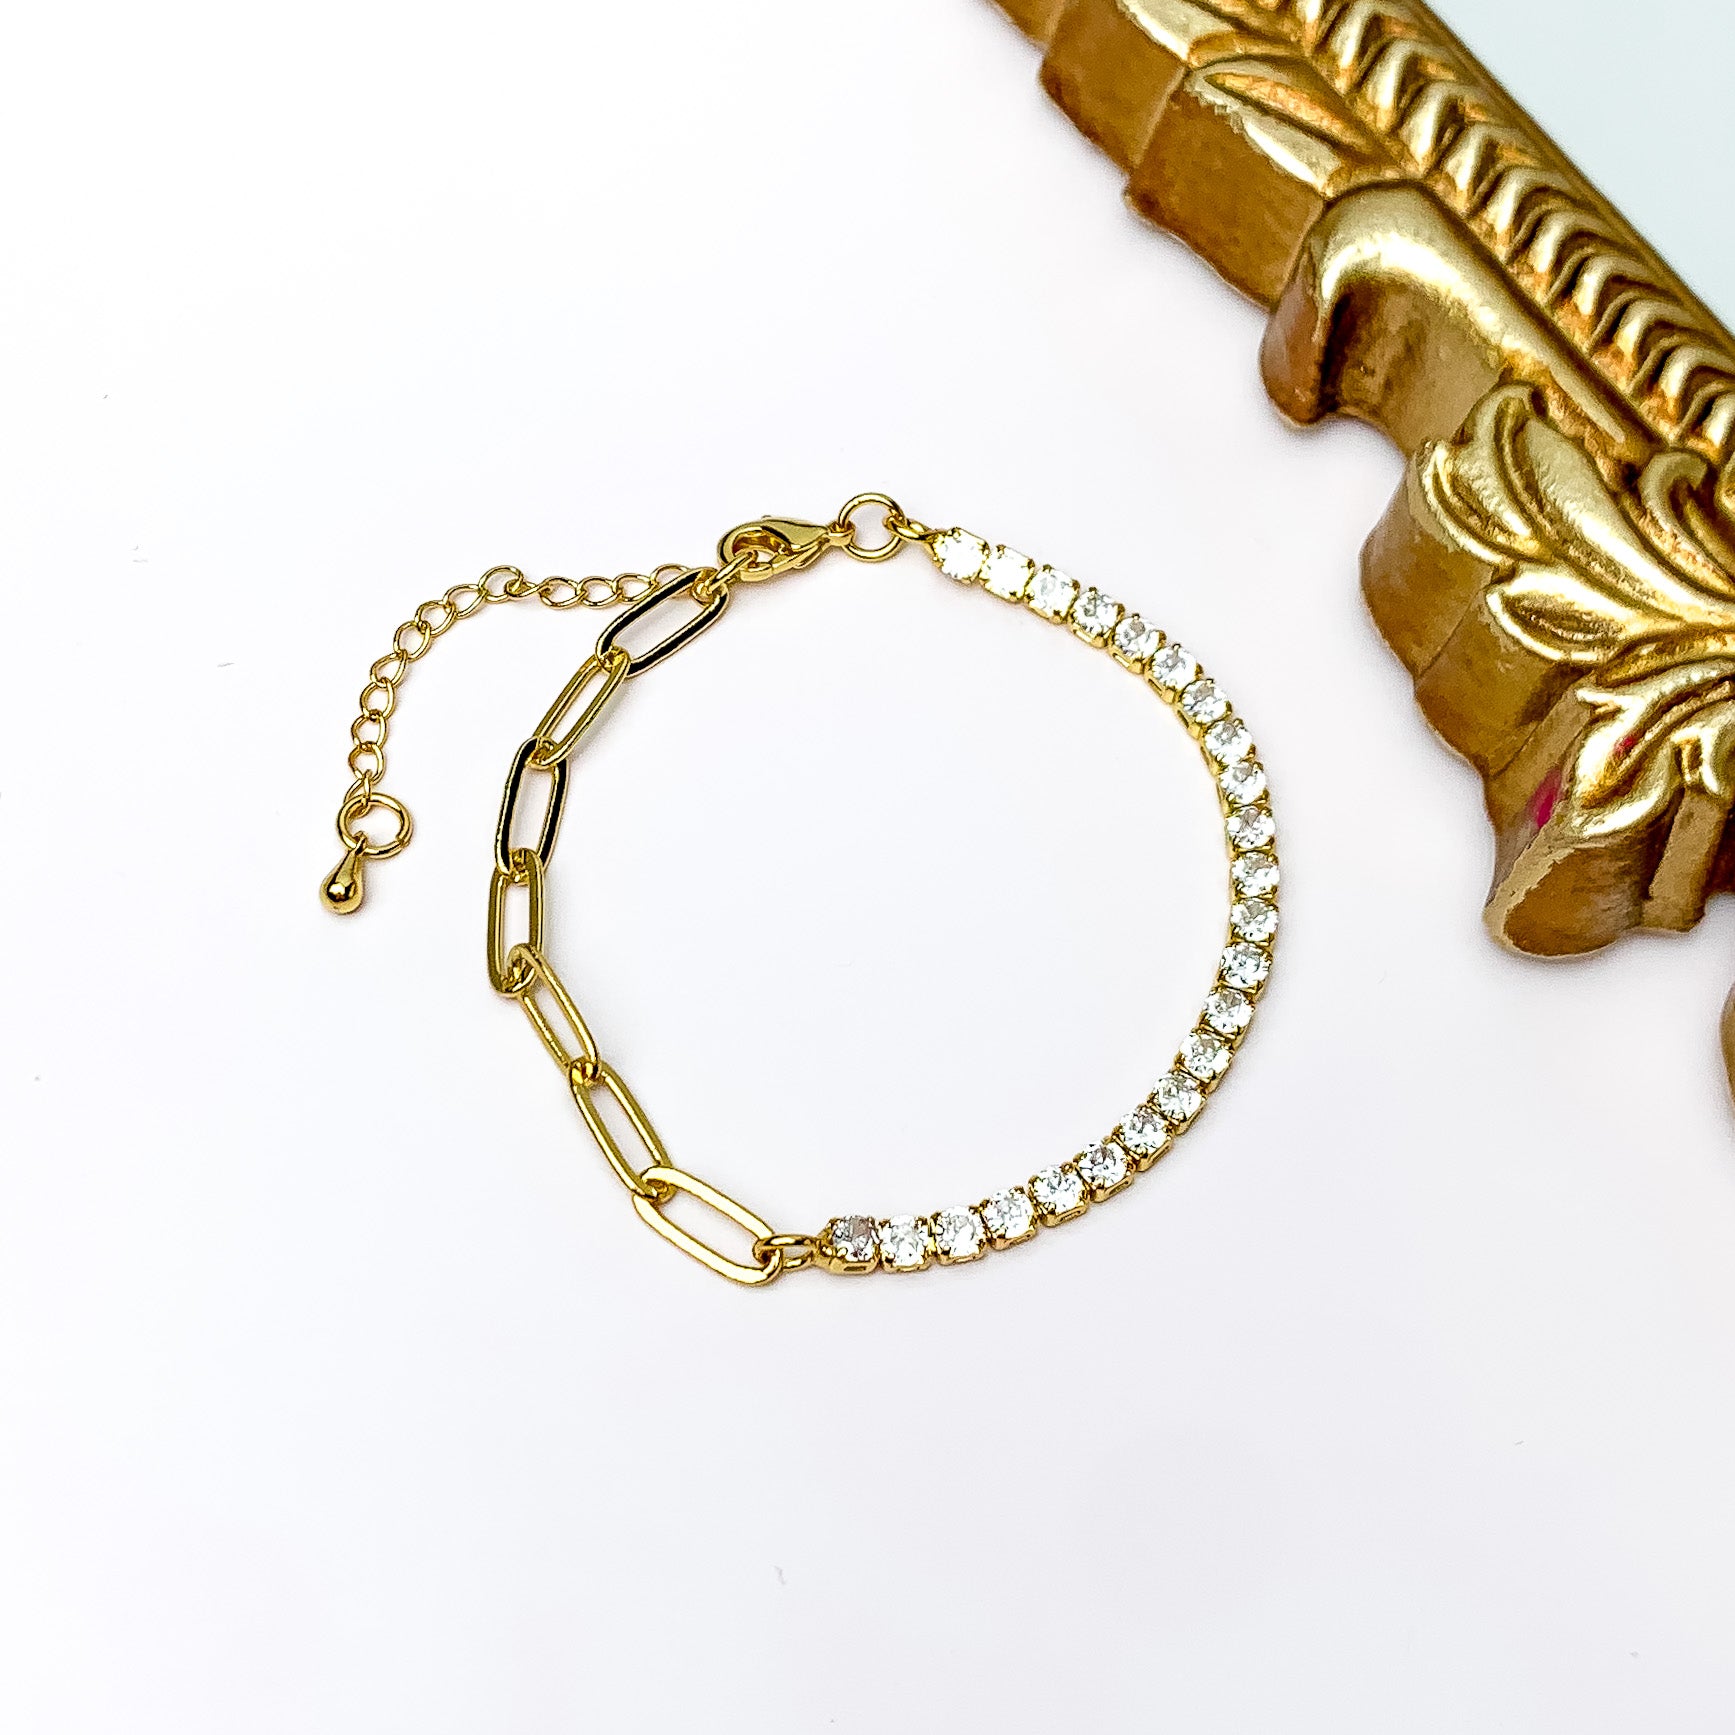 Pictured is half gold chain and half clear crystal, adjustable bracelet. This bracelet is pictured on a white background with a gold mirror shown in the top right corner.  